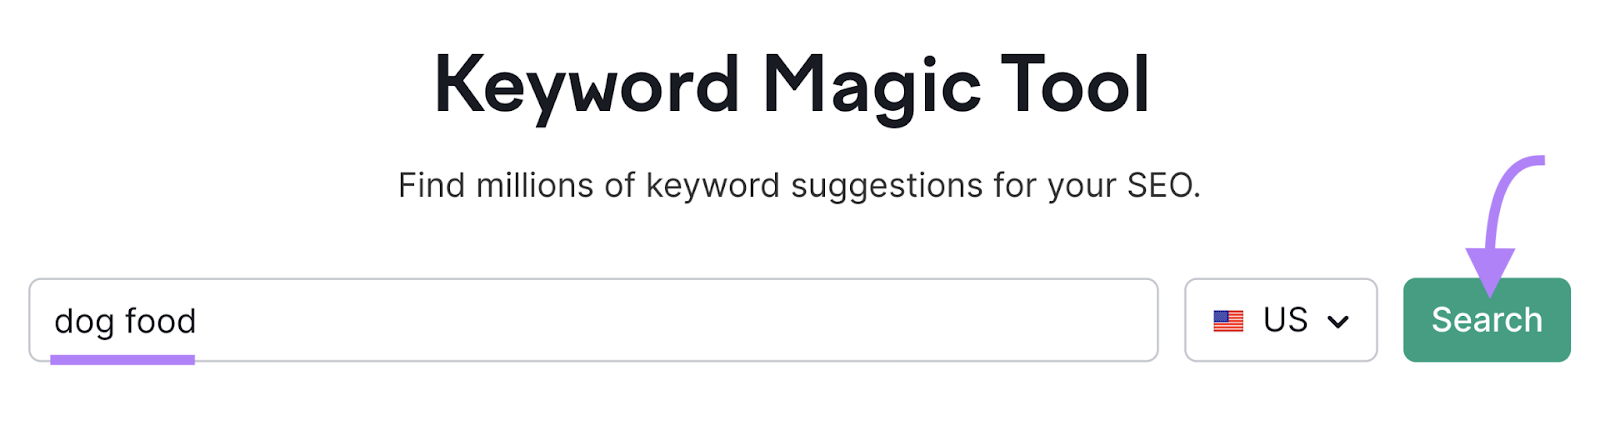 search for "dog food" in Keyword Magic Tool